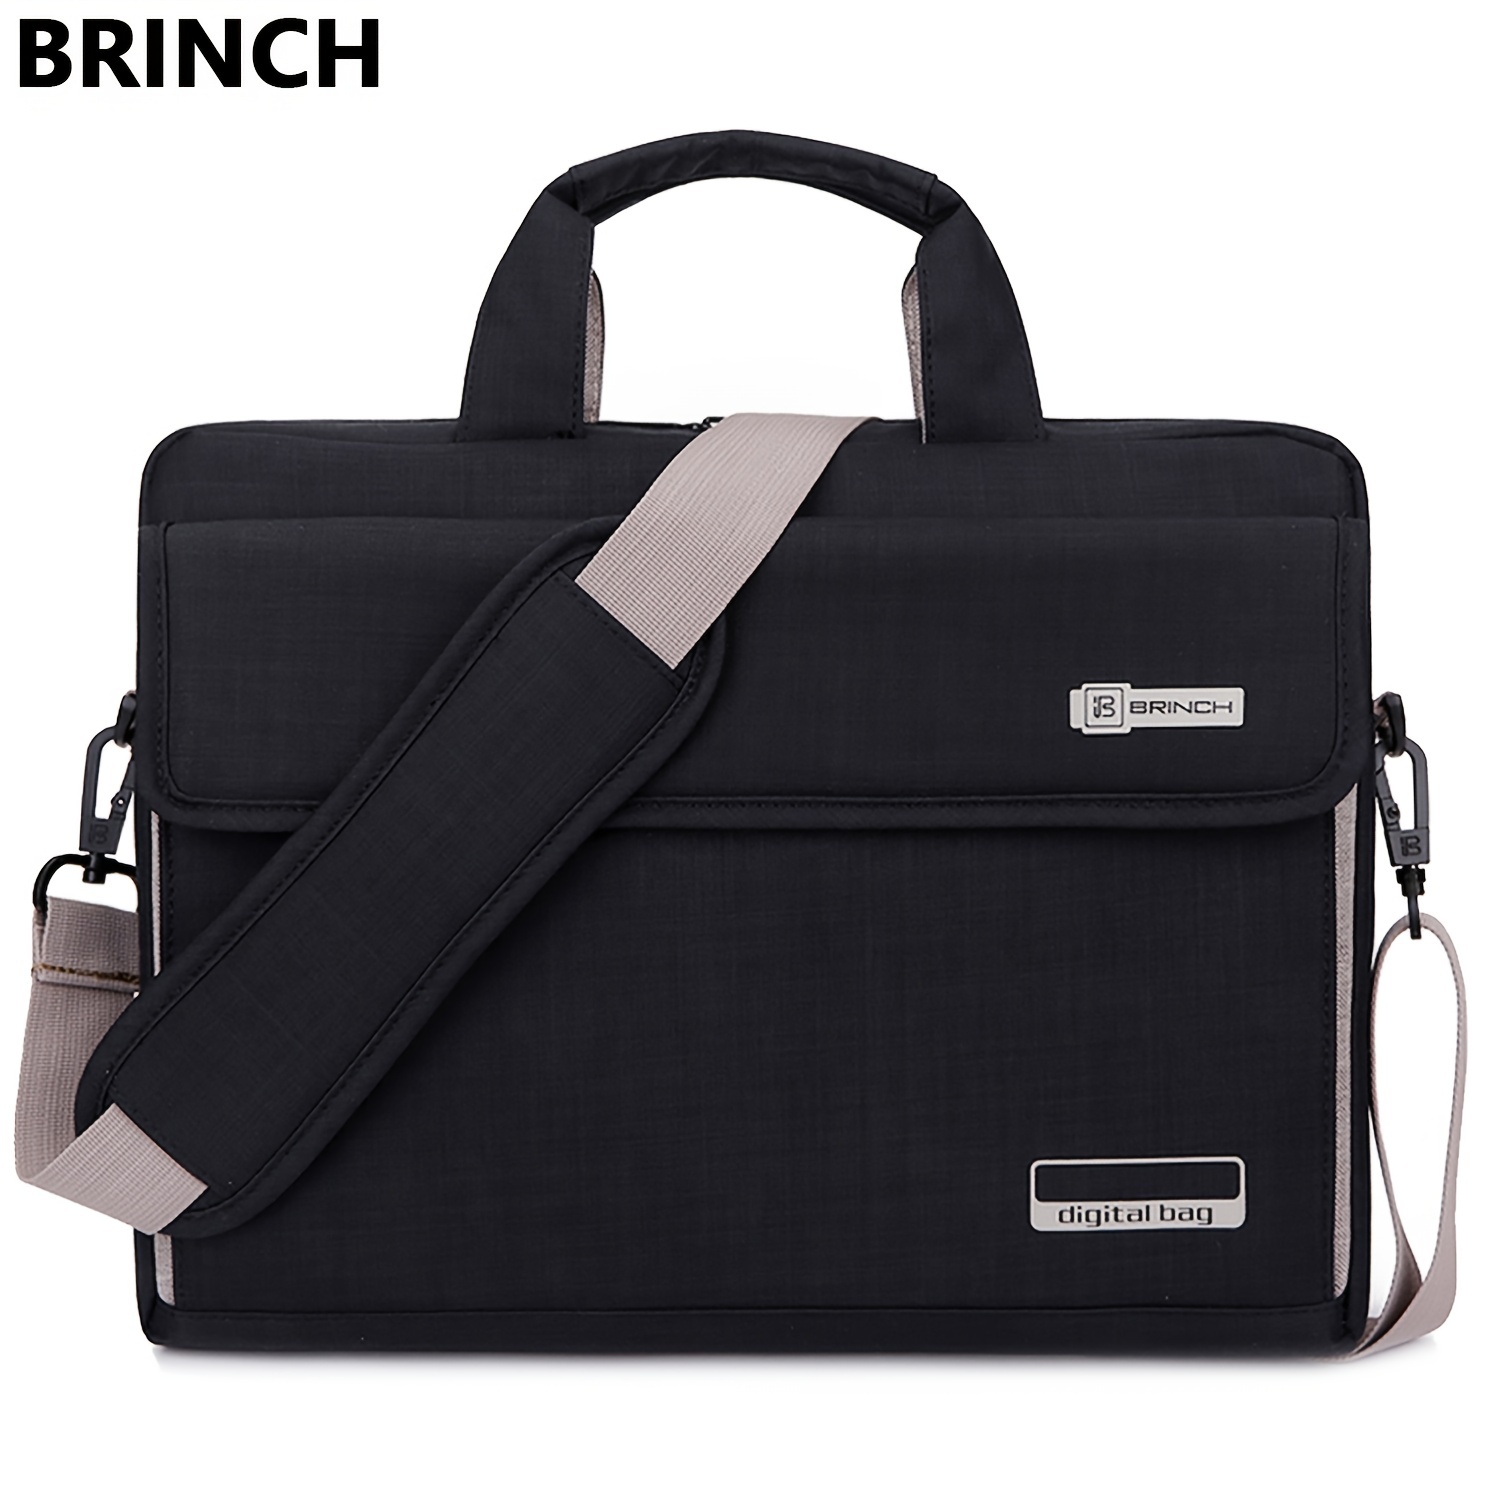 BRINCH Laptop Bag With Shoulder And Luggage Straps - Shop Now Free Shipping & Returns!